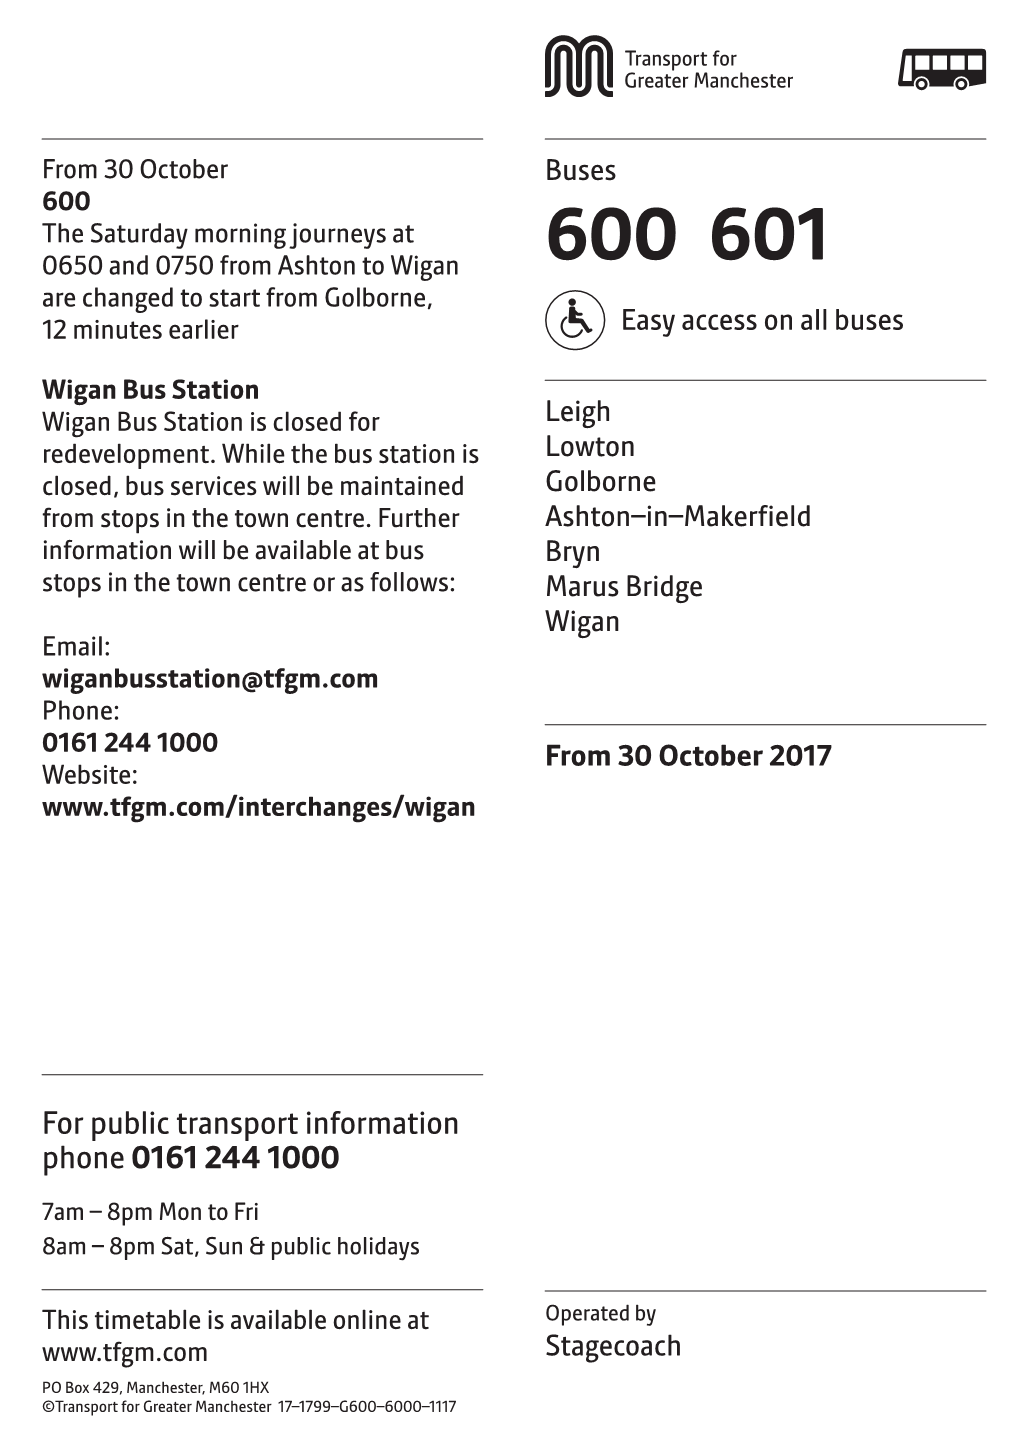 600 the Saturday Morning Journeys at 0650 and 0750 from Ashton to Wigan 600 601 Are Changed to Start from Golborne, 12 Minutes Earlier Easy Access on All Buses